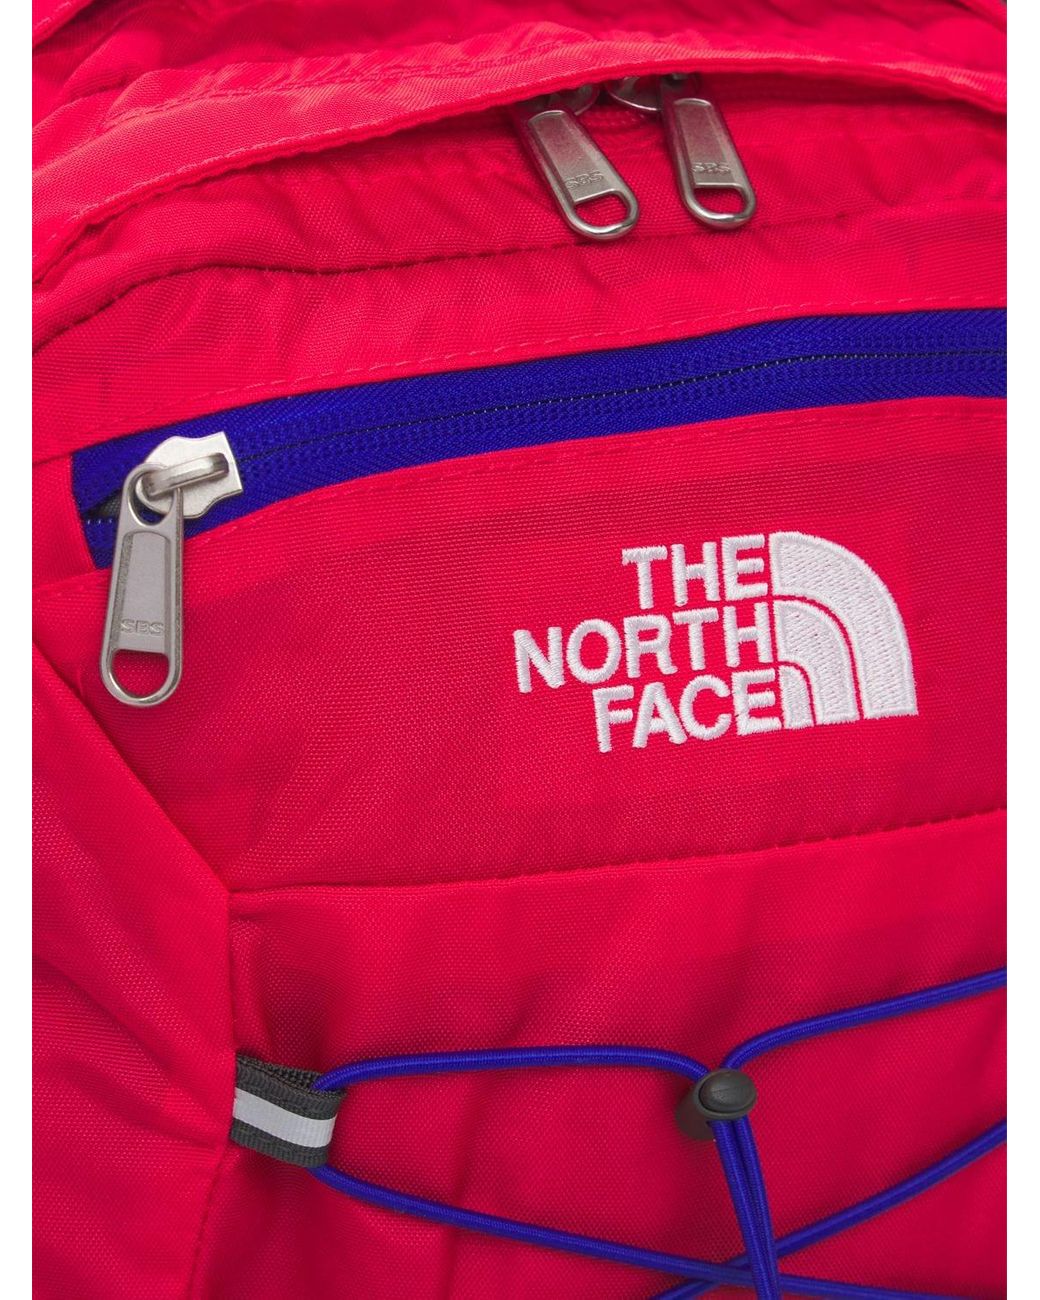 The North Face Borealis Classic Backpack in Red | Lyst